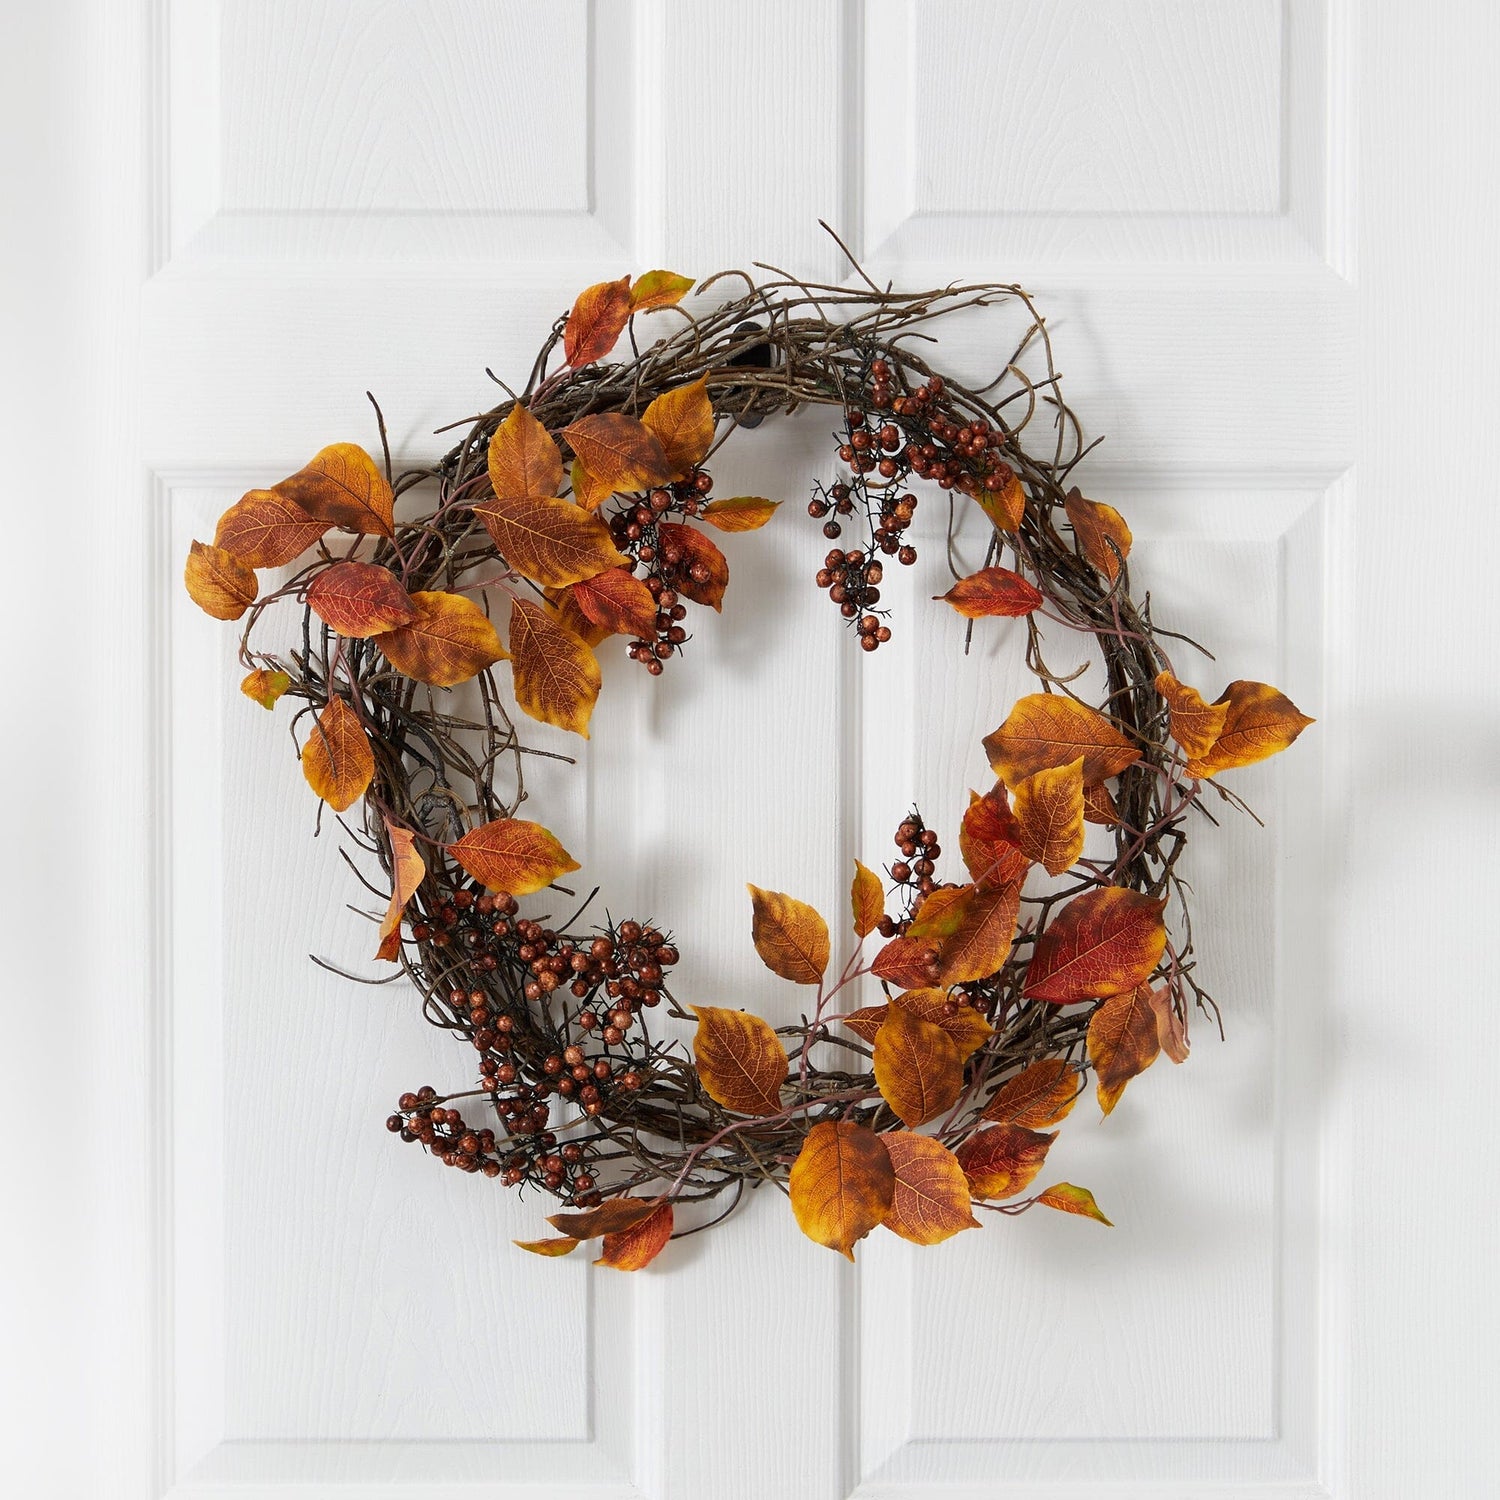 19” Harvest Leaf, Berries  and Twig Artificial Wreath